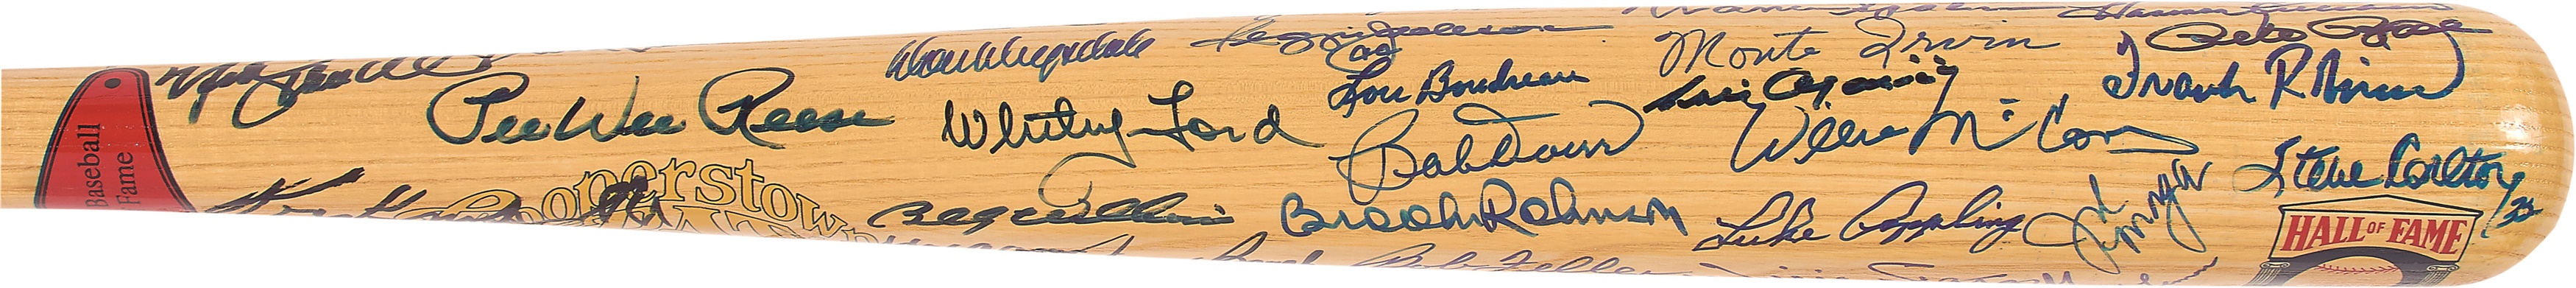 Loaded Hall of Fame Signed Cooperstown Bat with Roy Campanella - 50+ Signatures